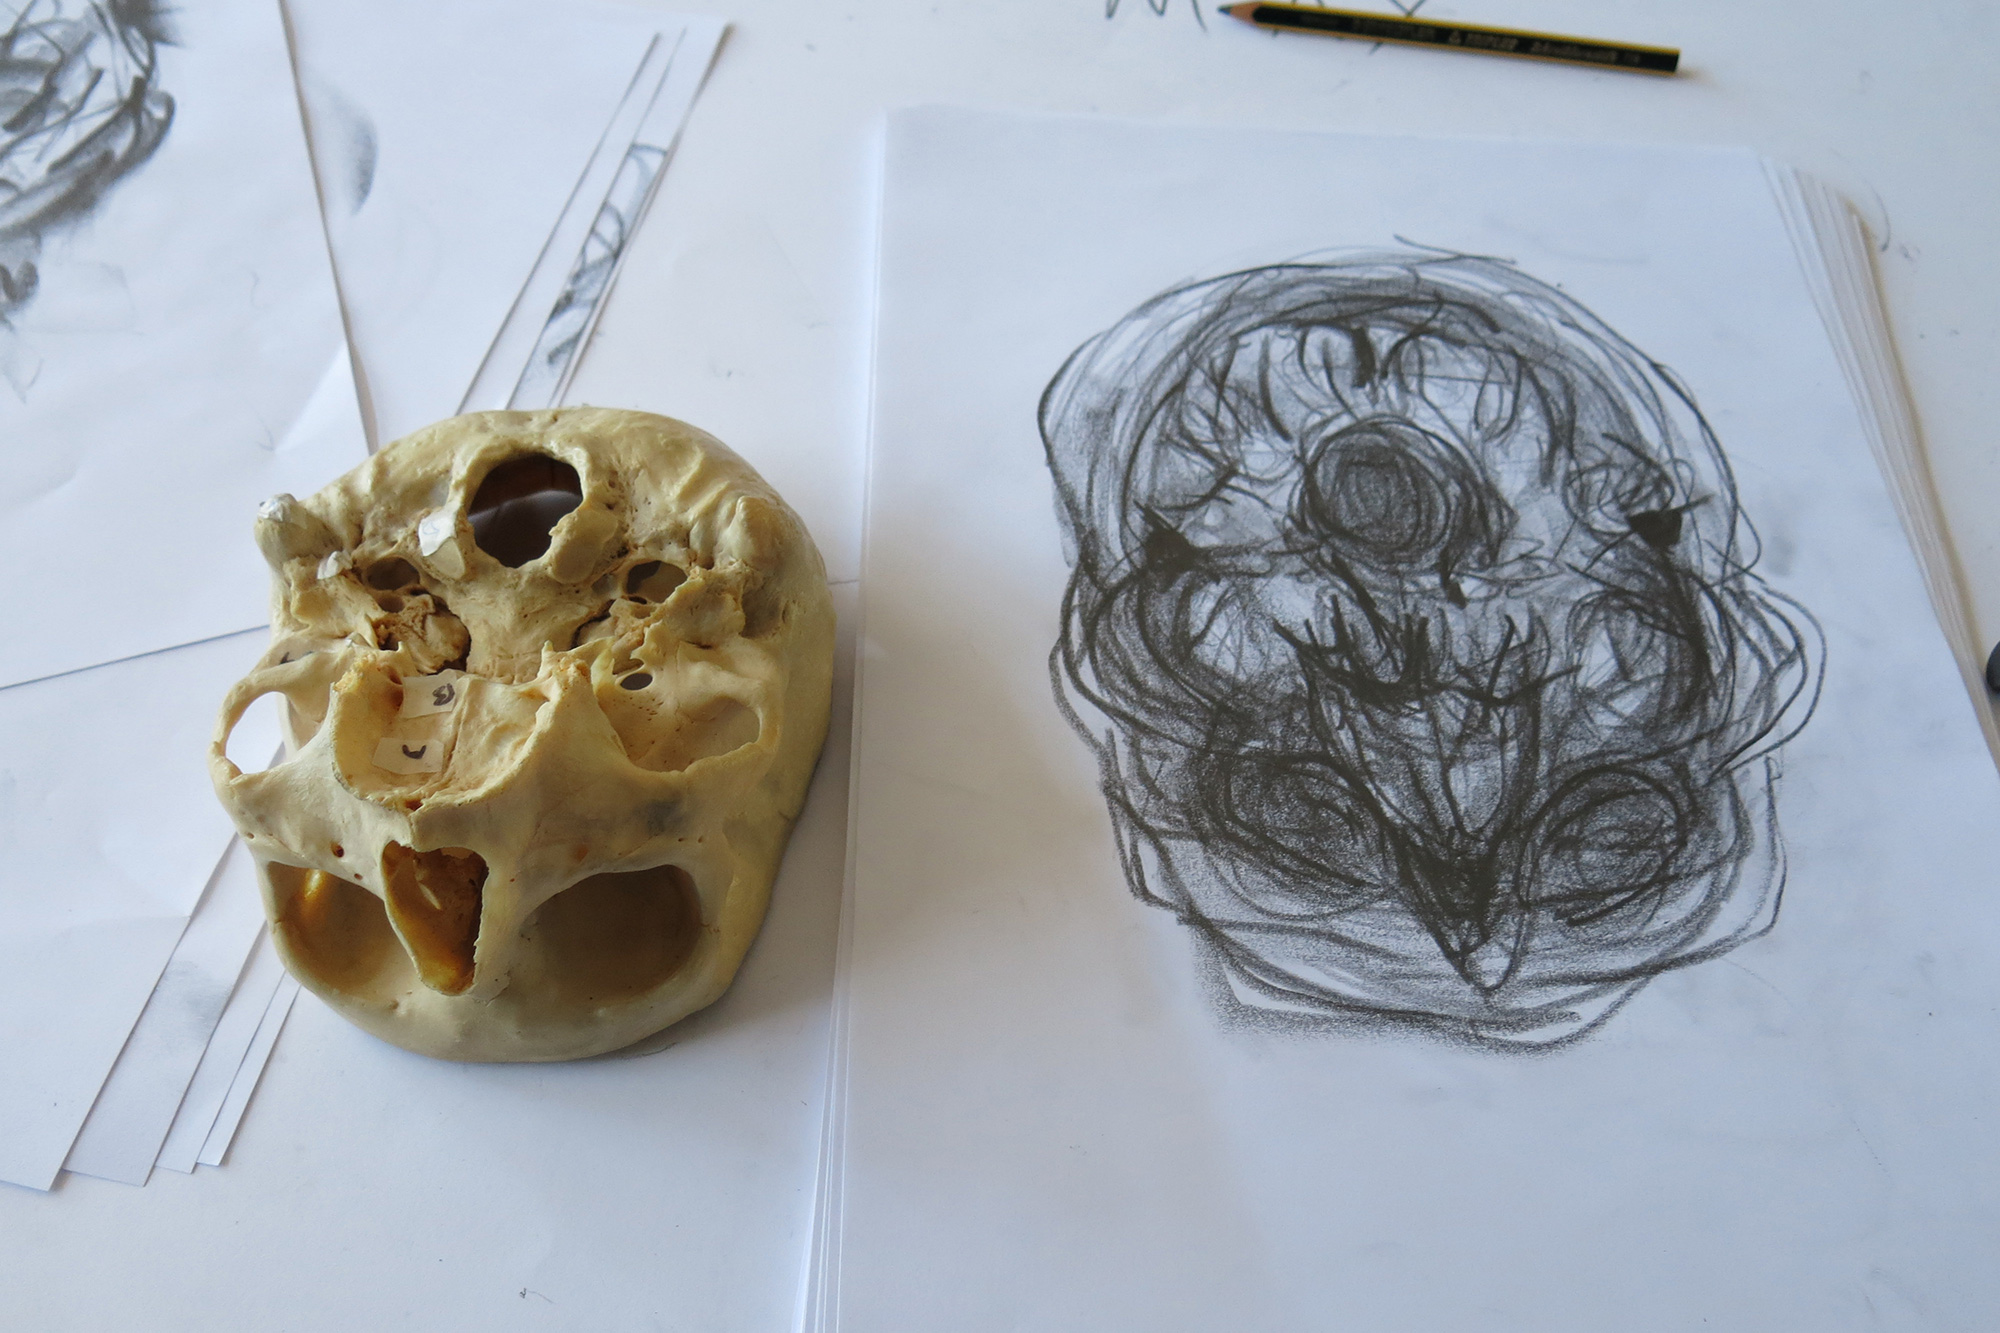 Enhancing the learning of anatomy | UCT News